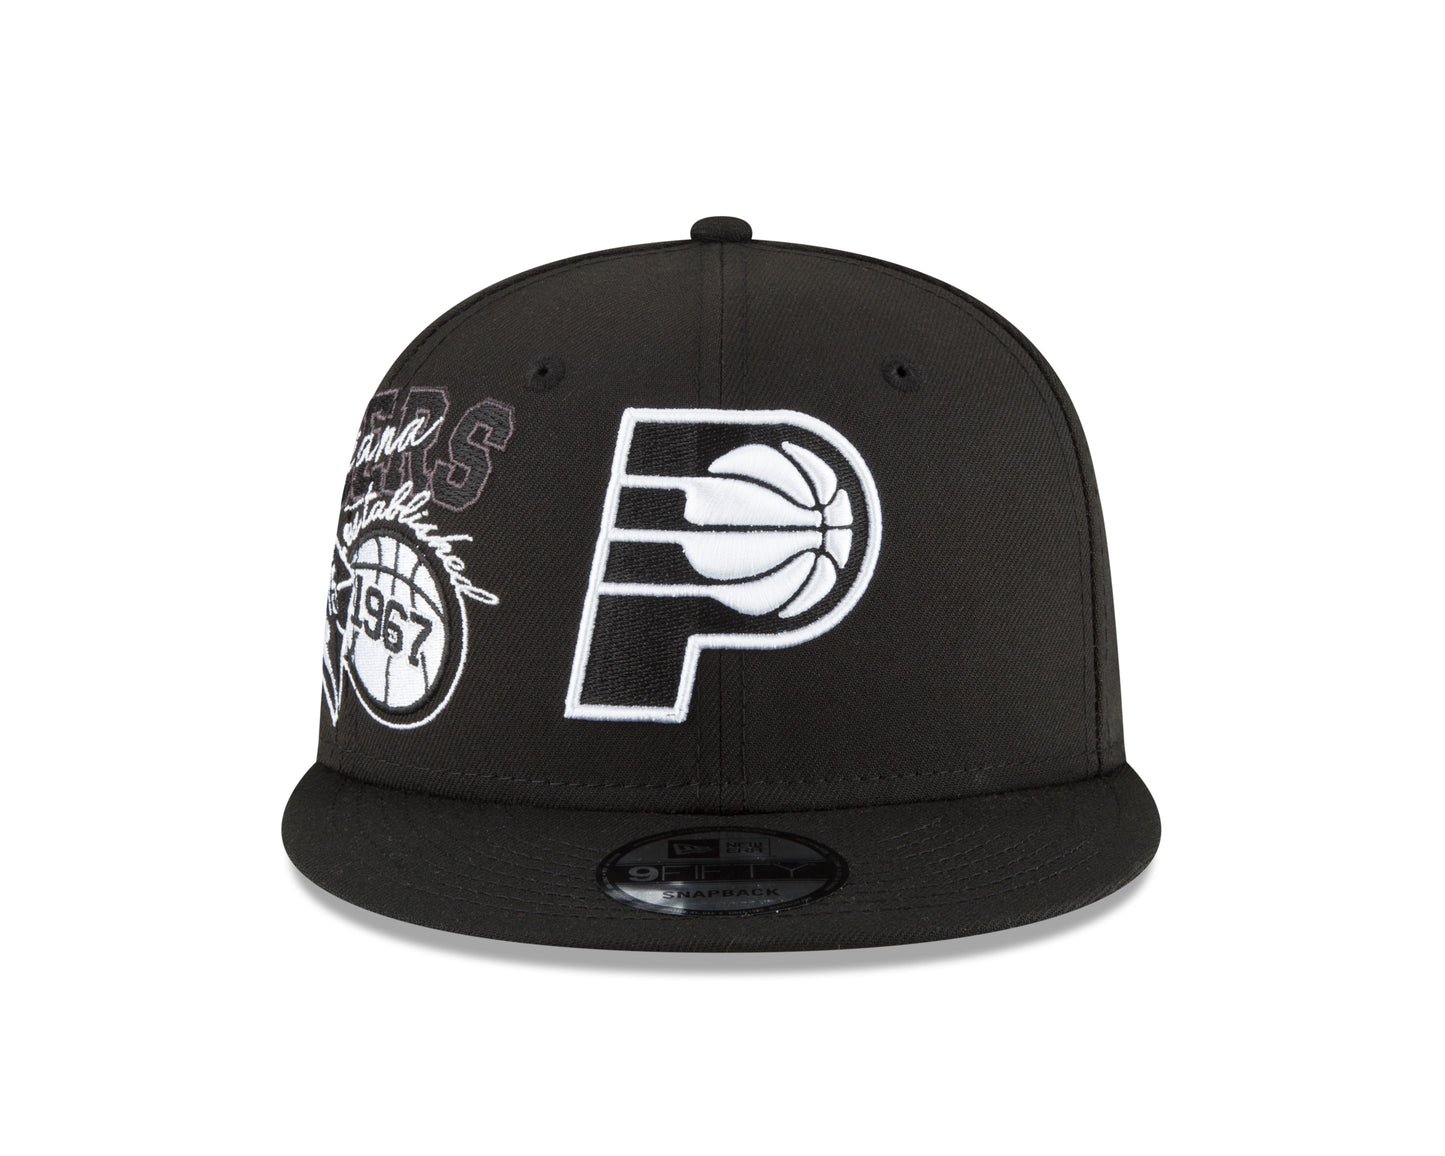 Indiana Pacers Black & White Back Half Series 9FIFTY Snap Back Hat